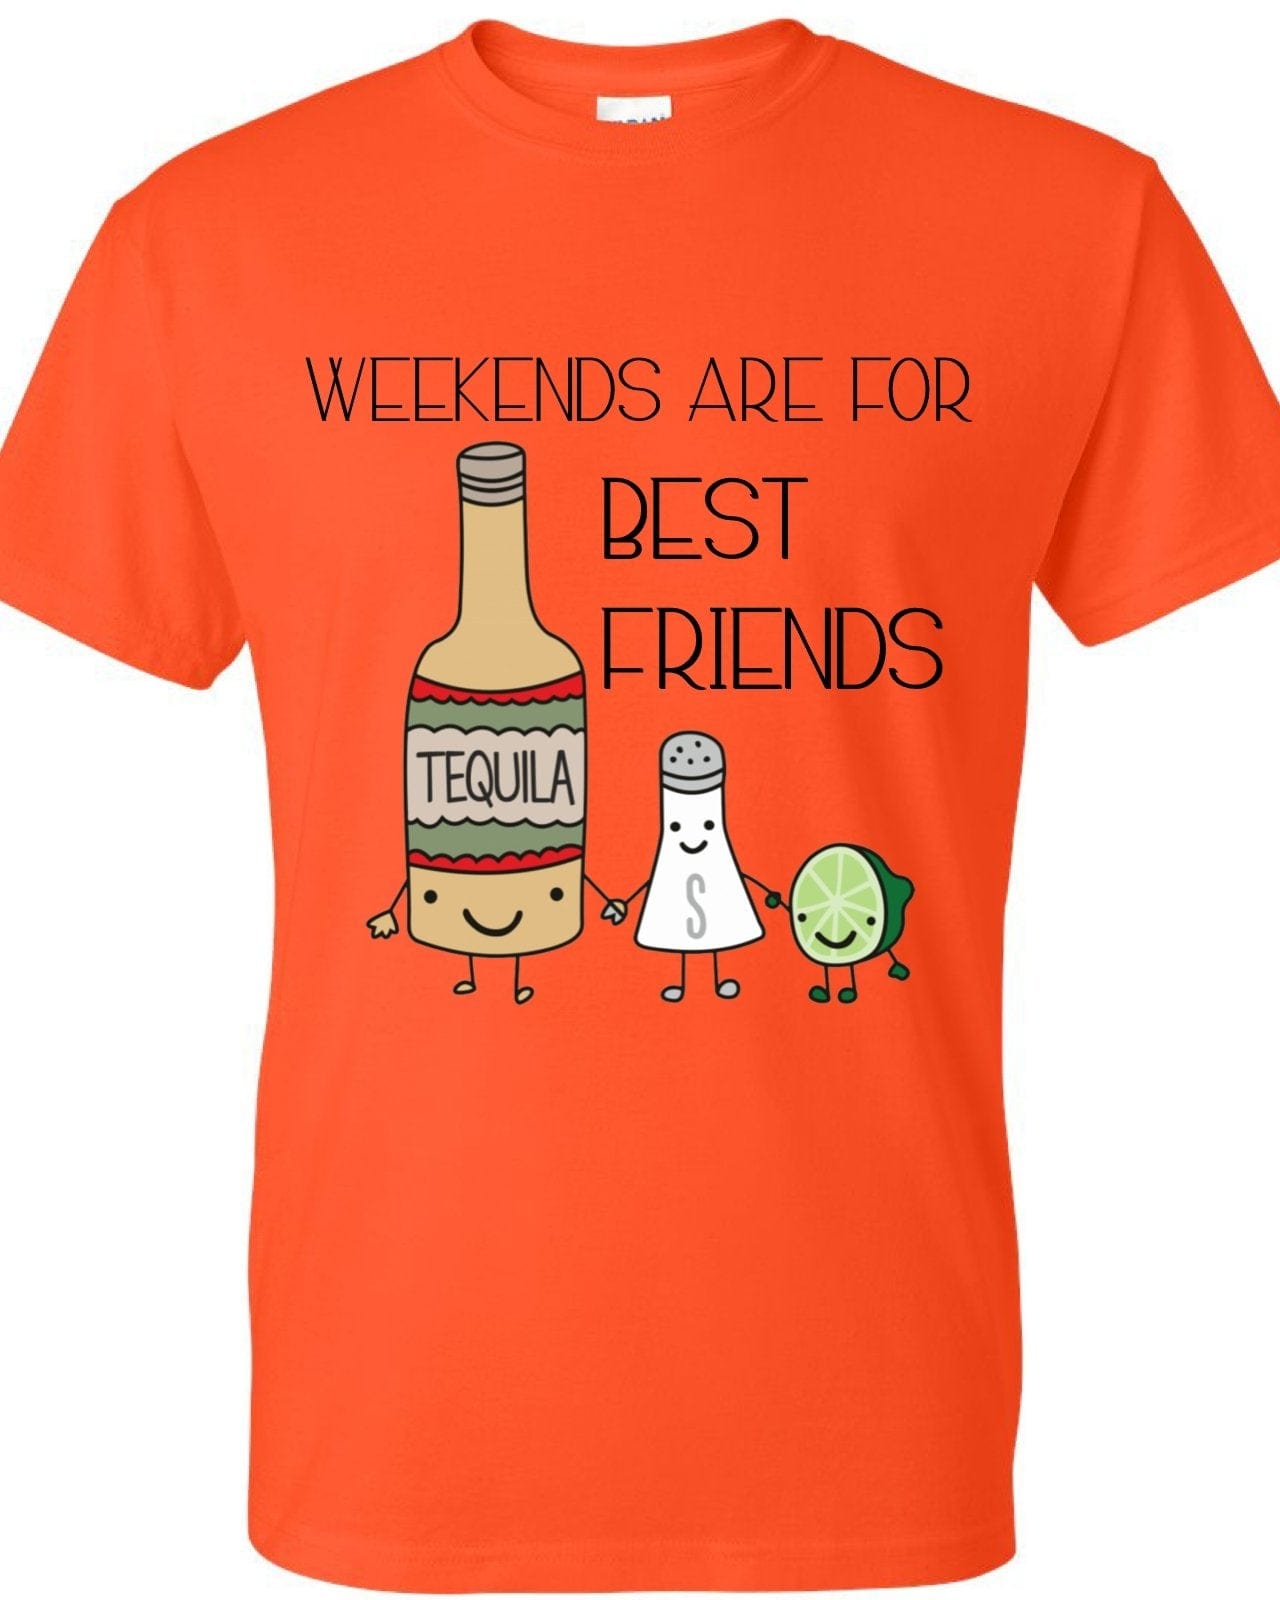 InsensitiviTees Shirts S / Orange Weekends Are For Best Friends